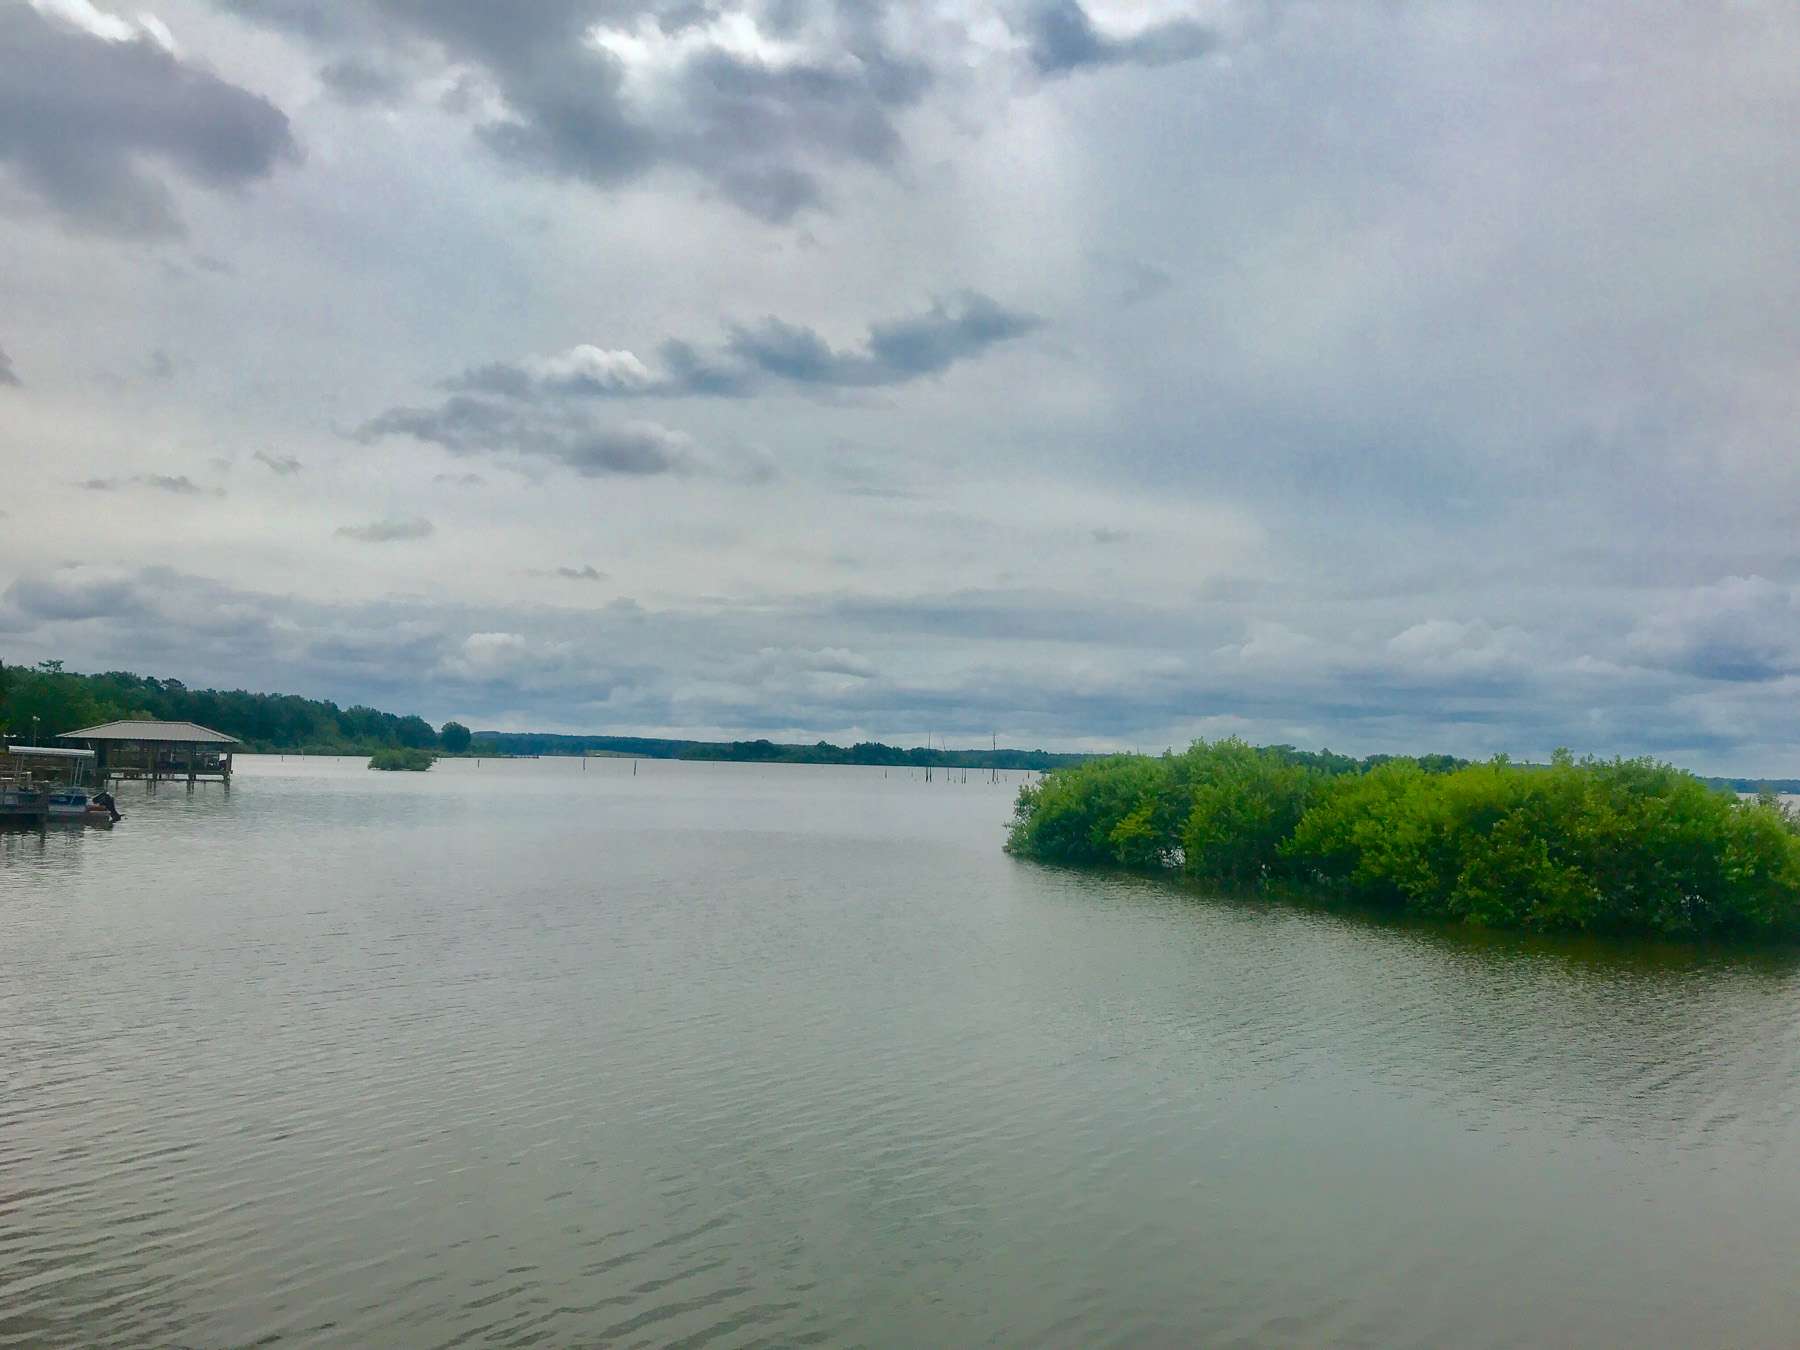 <h4>5. Lake Palestine, Texas </h4>
[25,560 acres] You have to be a stick to break the Top 10 on this lake, at least on the Media Bass circuit. In January, if you didnât have a 17-pound limit, you werenât even looked at. A 27.64-pound sack topped the eight 20-pound limits placed on the scales. That trend continued in February, with six 20-pound stringers led by 25.47 pounds. A Texas Bassmaster Team Trail event in October 2016 was won with a 10-fish stringer tipping the scales at 41.62 pounds. 
